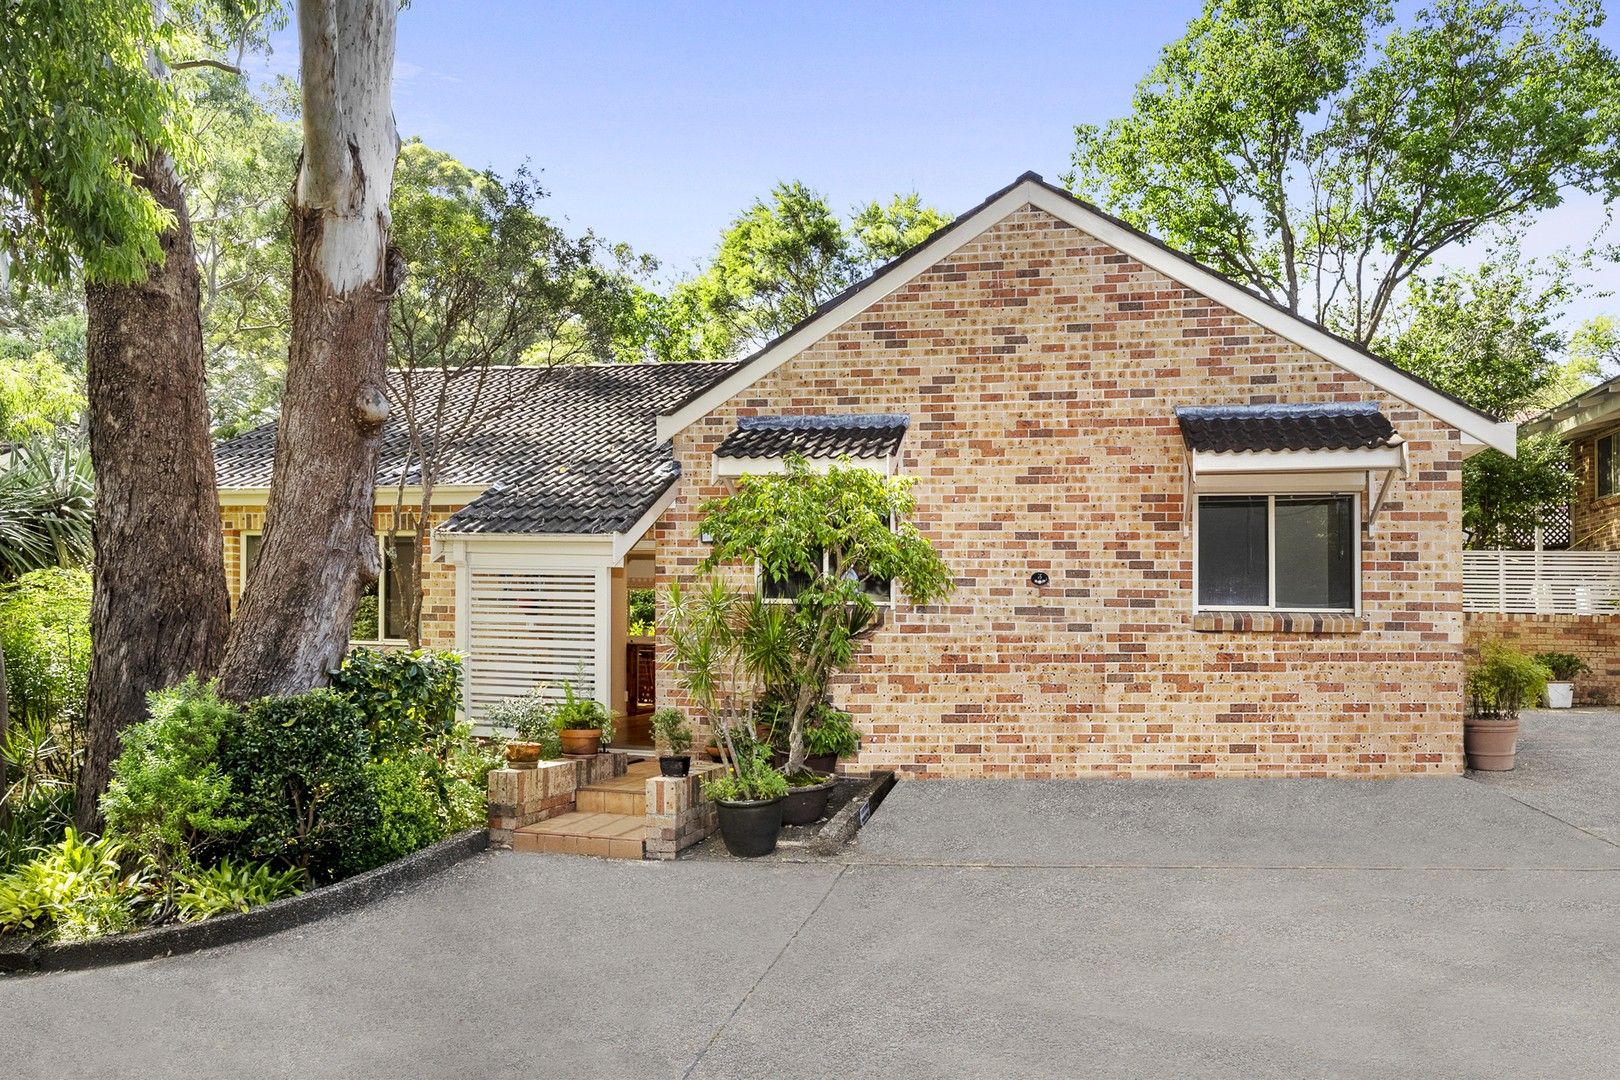 3 bedrooms House in 3/41 Finlayson Street LANE COVE NSW, 2066